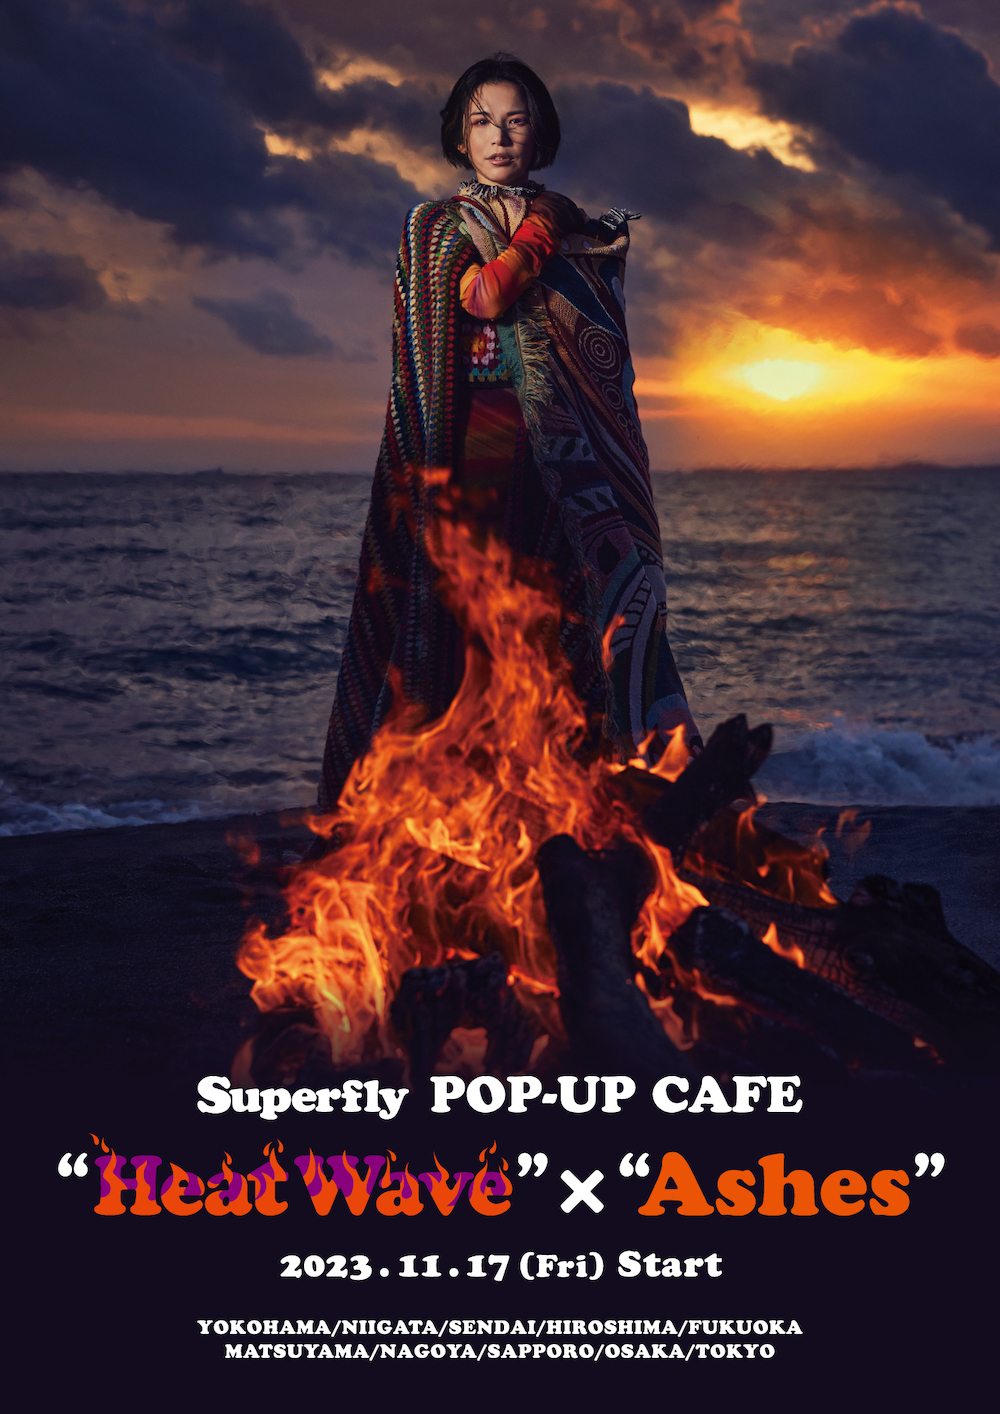 『Superfly POP-UP CAFE “Heat Wave” × “Ashes”』キービジュアル